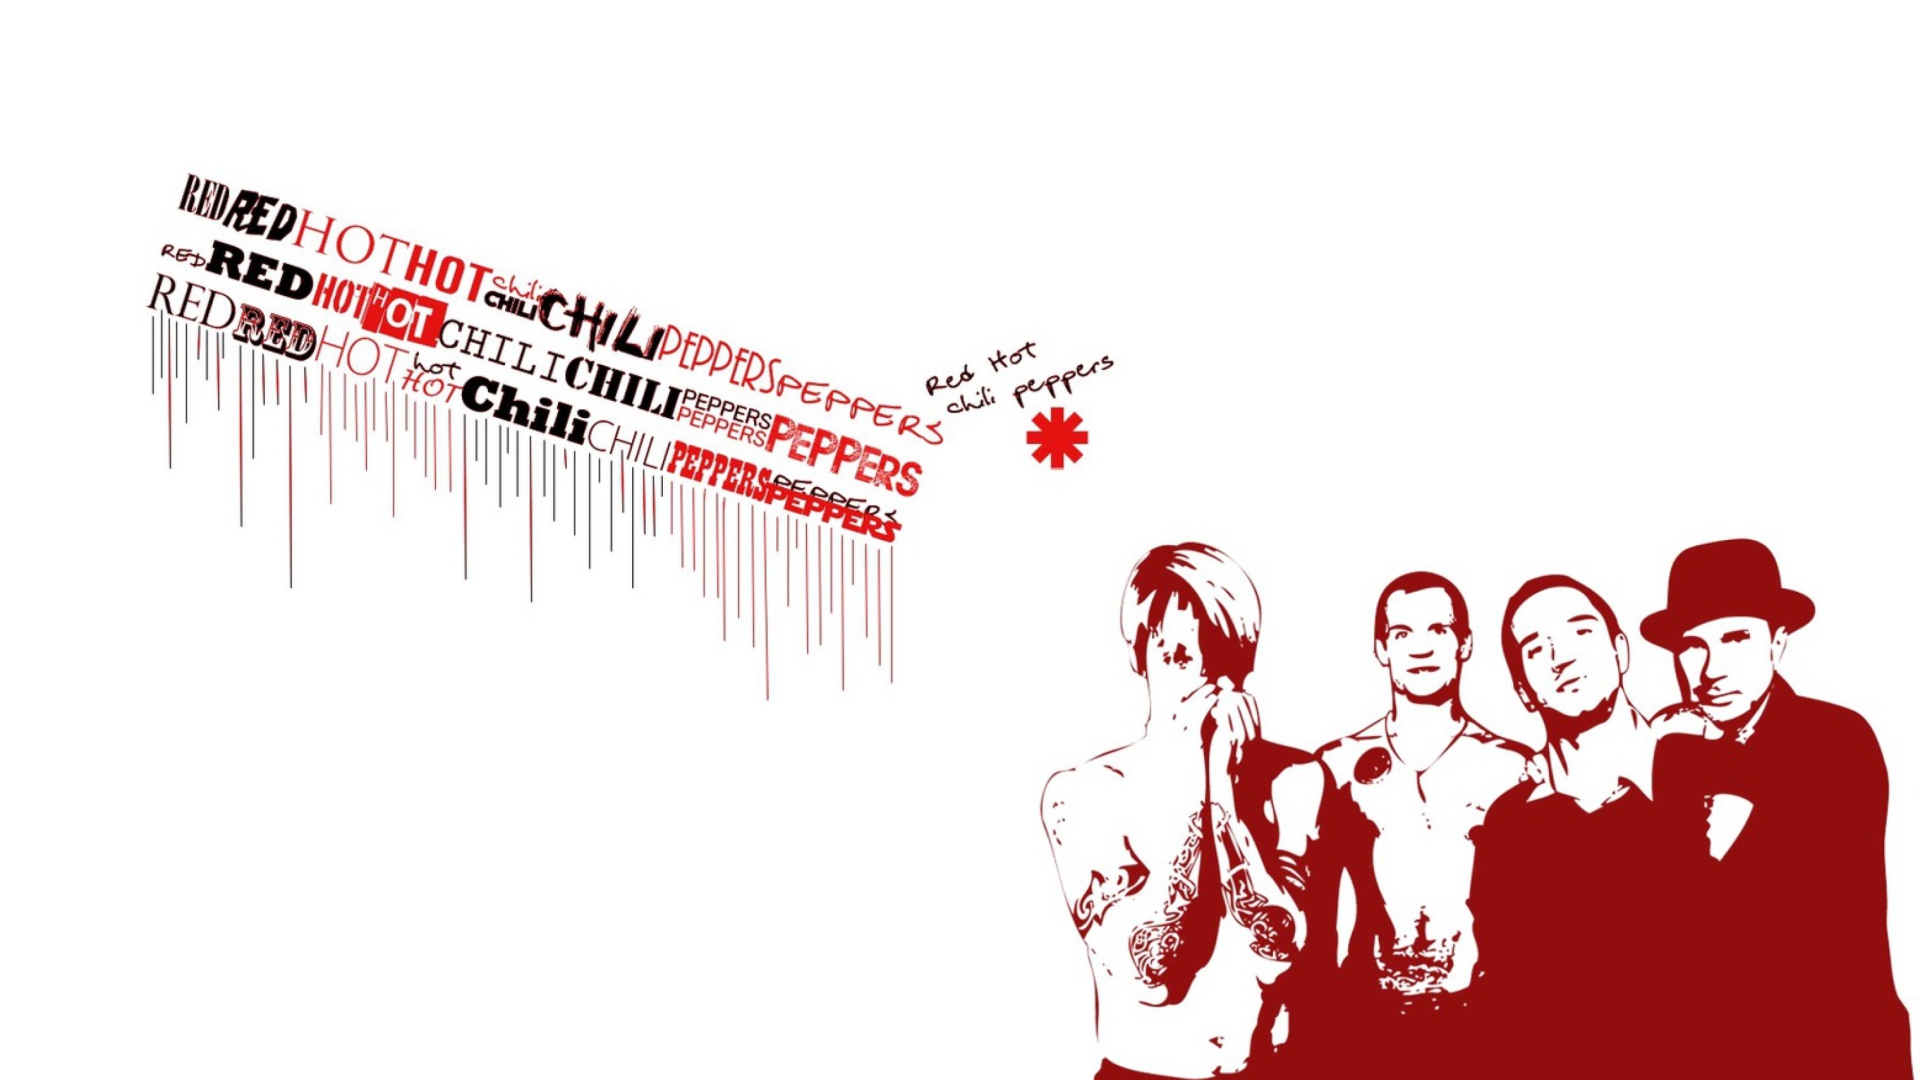 Red Hot Chili Peppers wallpaper 1920x1080